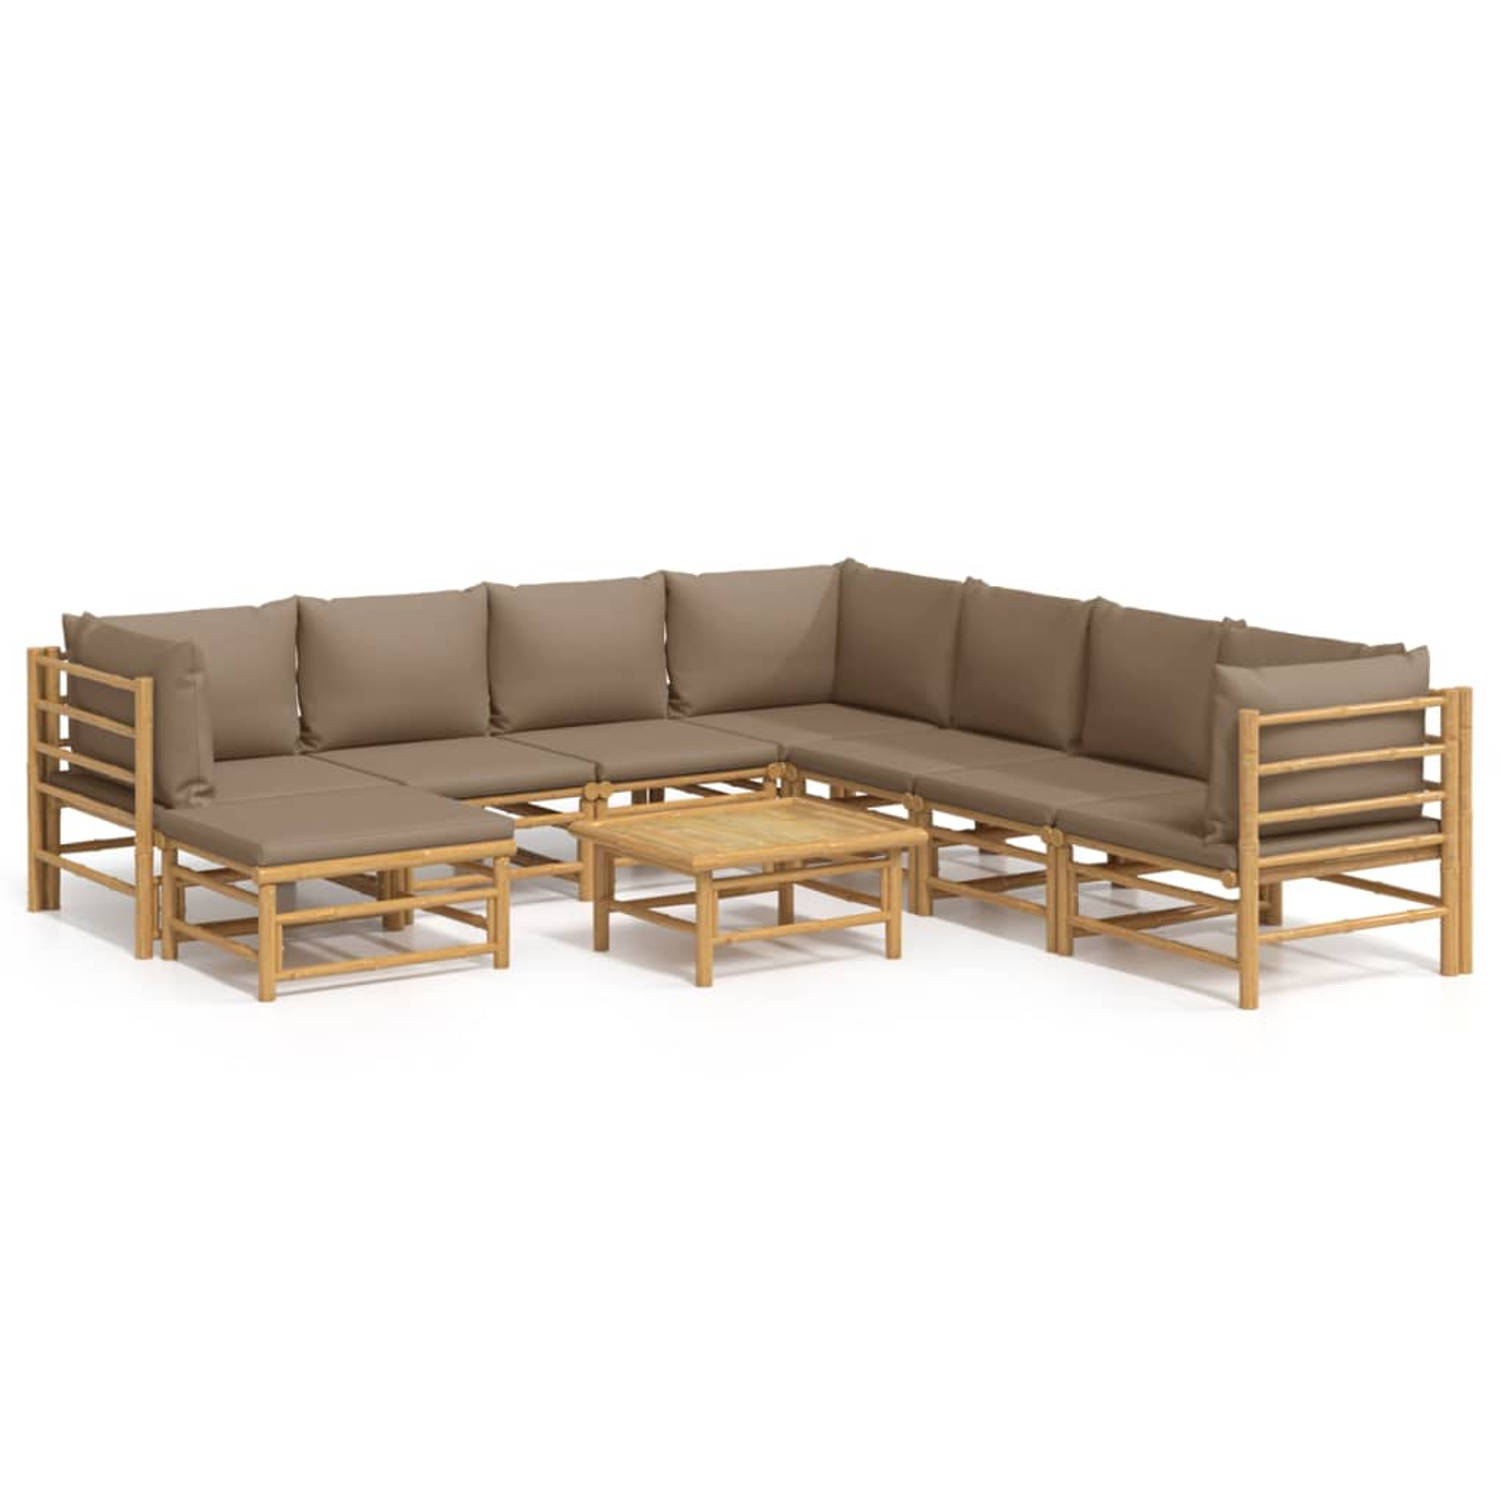 The Living Store 9-delige Loungeset met kussens bamboe taupe - Tuinset